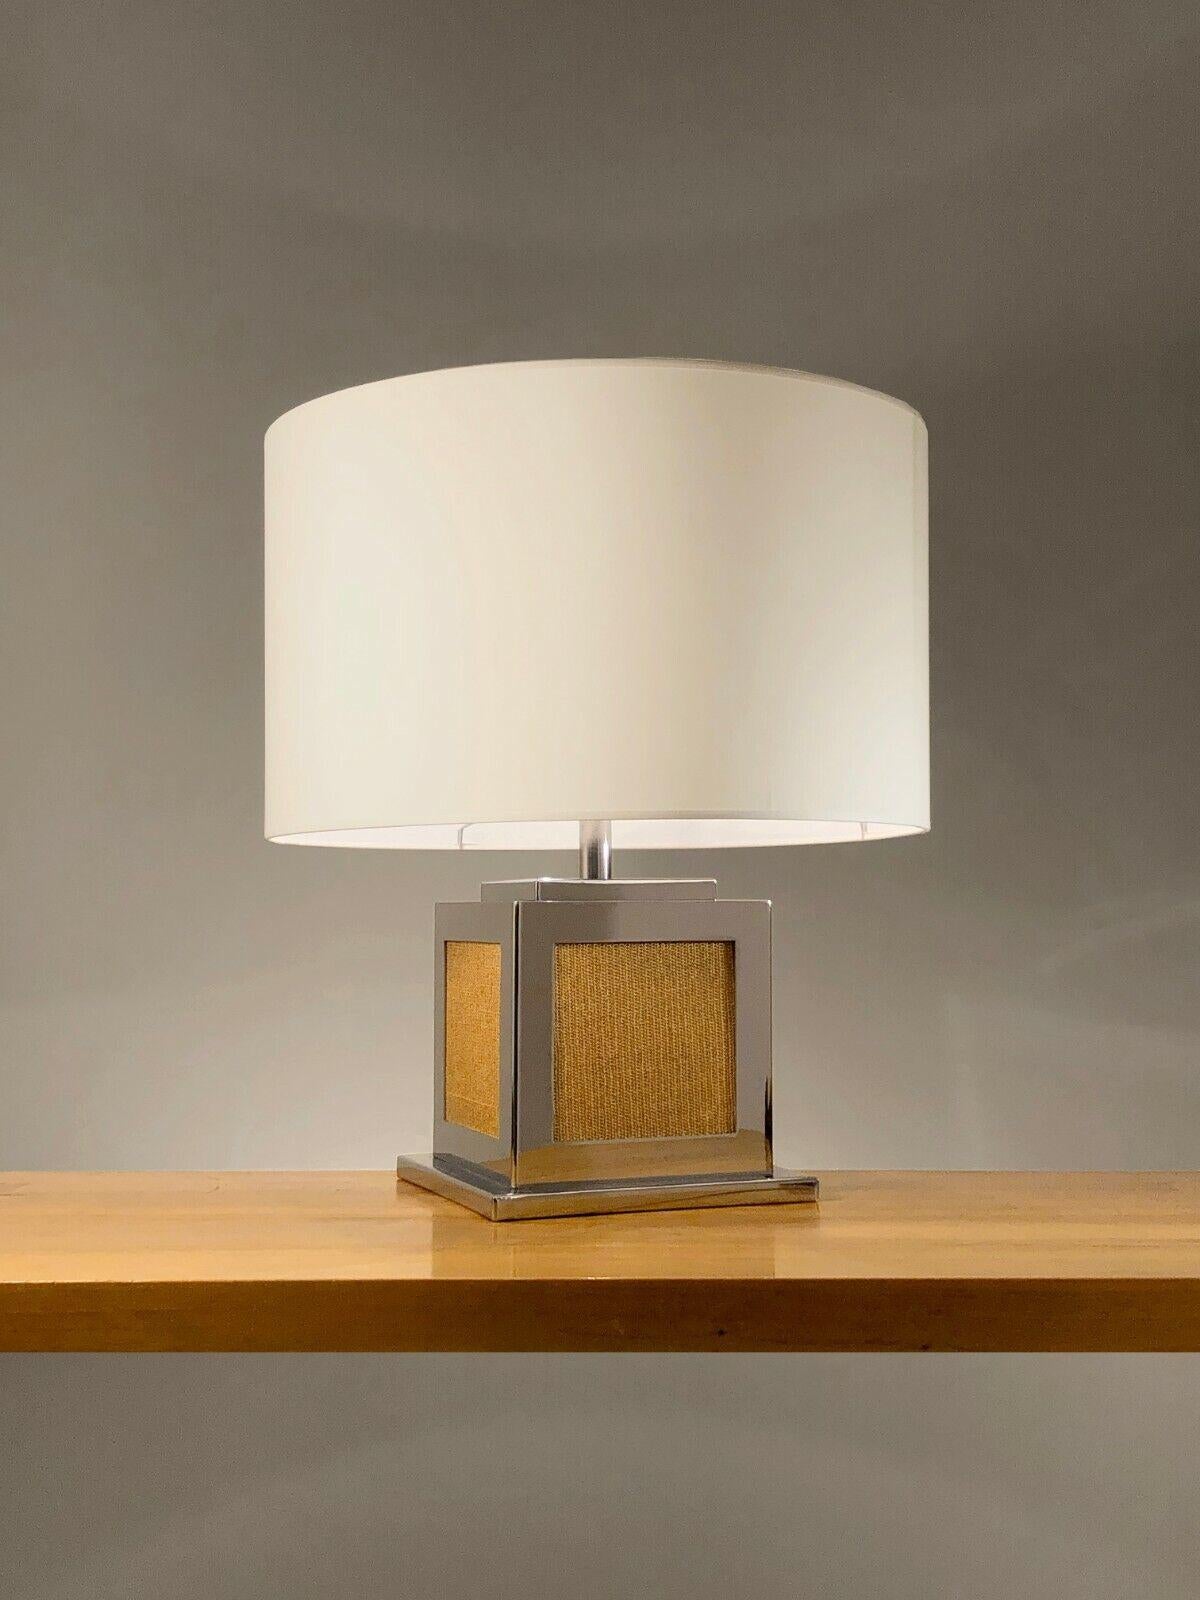 A generous and rigorous cubic table lamp, Post-Modernist, Shabby-Chic, stepped base in chrome metal with a square section enhanced by beige fabric tops, topped with a large cylindrical lampshade, to be attributed, France 1970- 1980.

DIMENSIONS: H